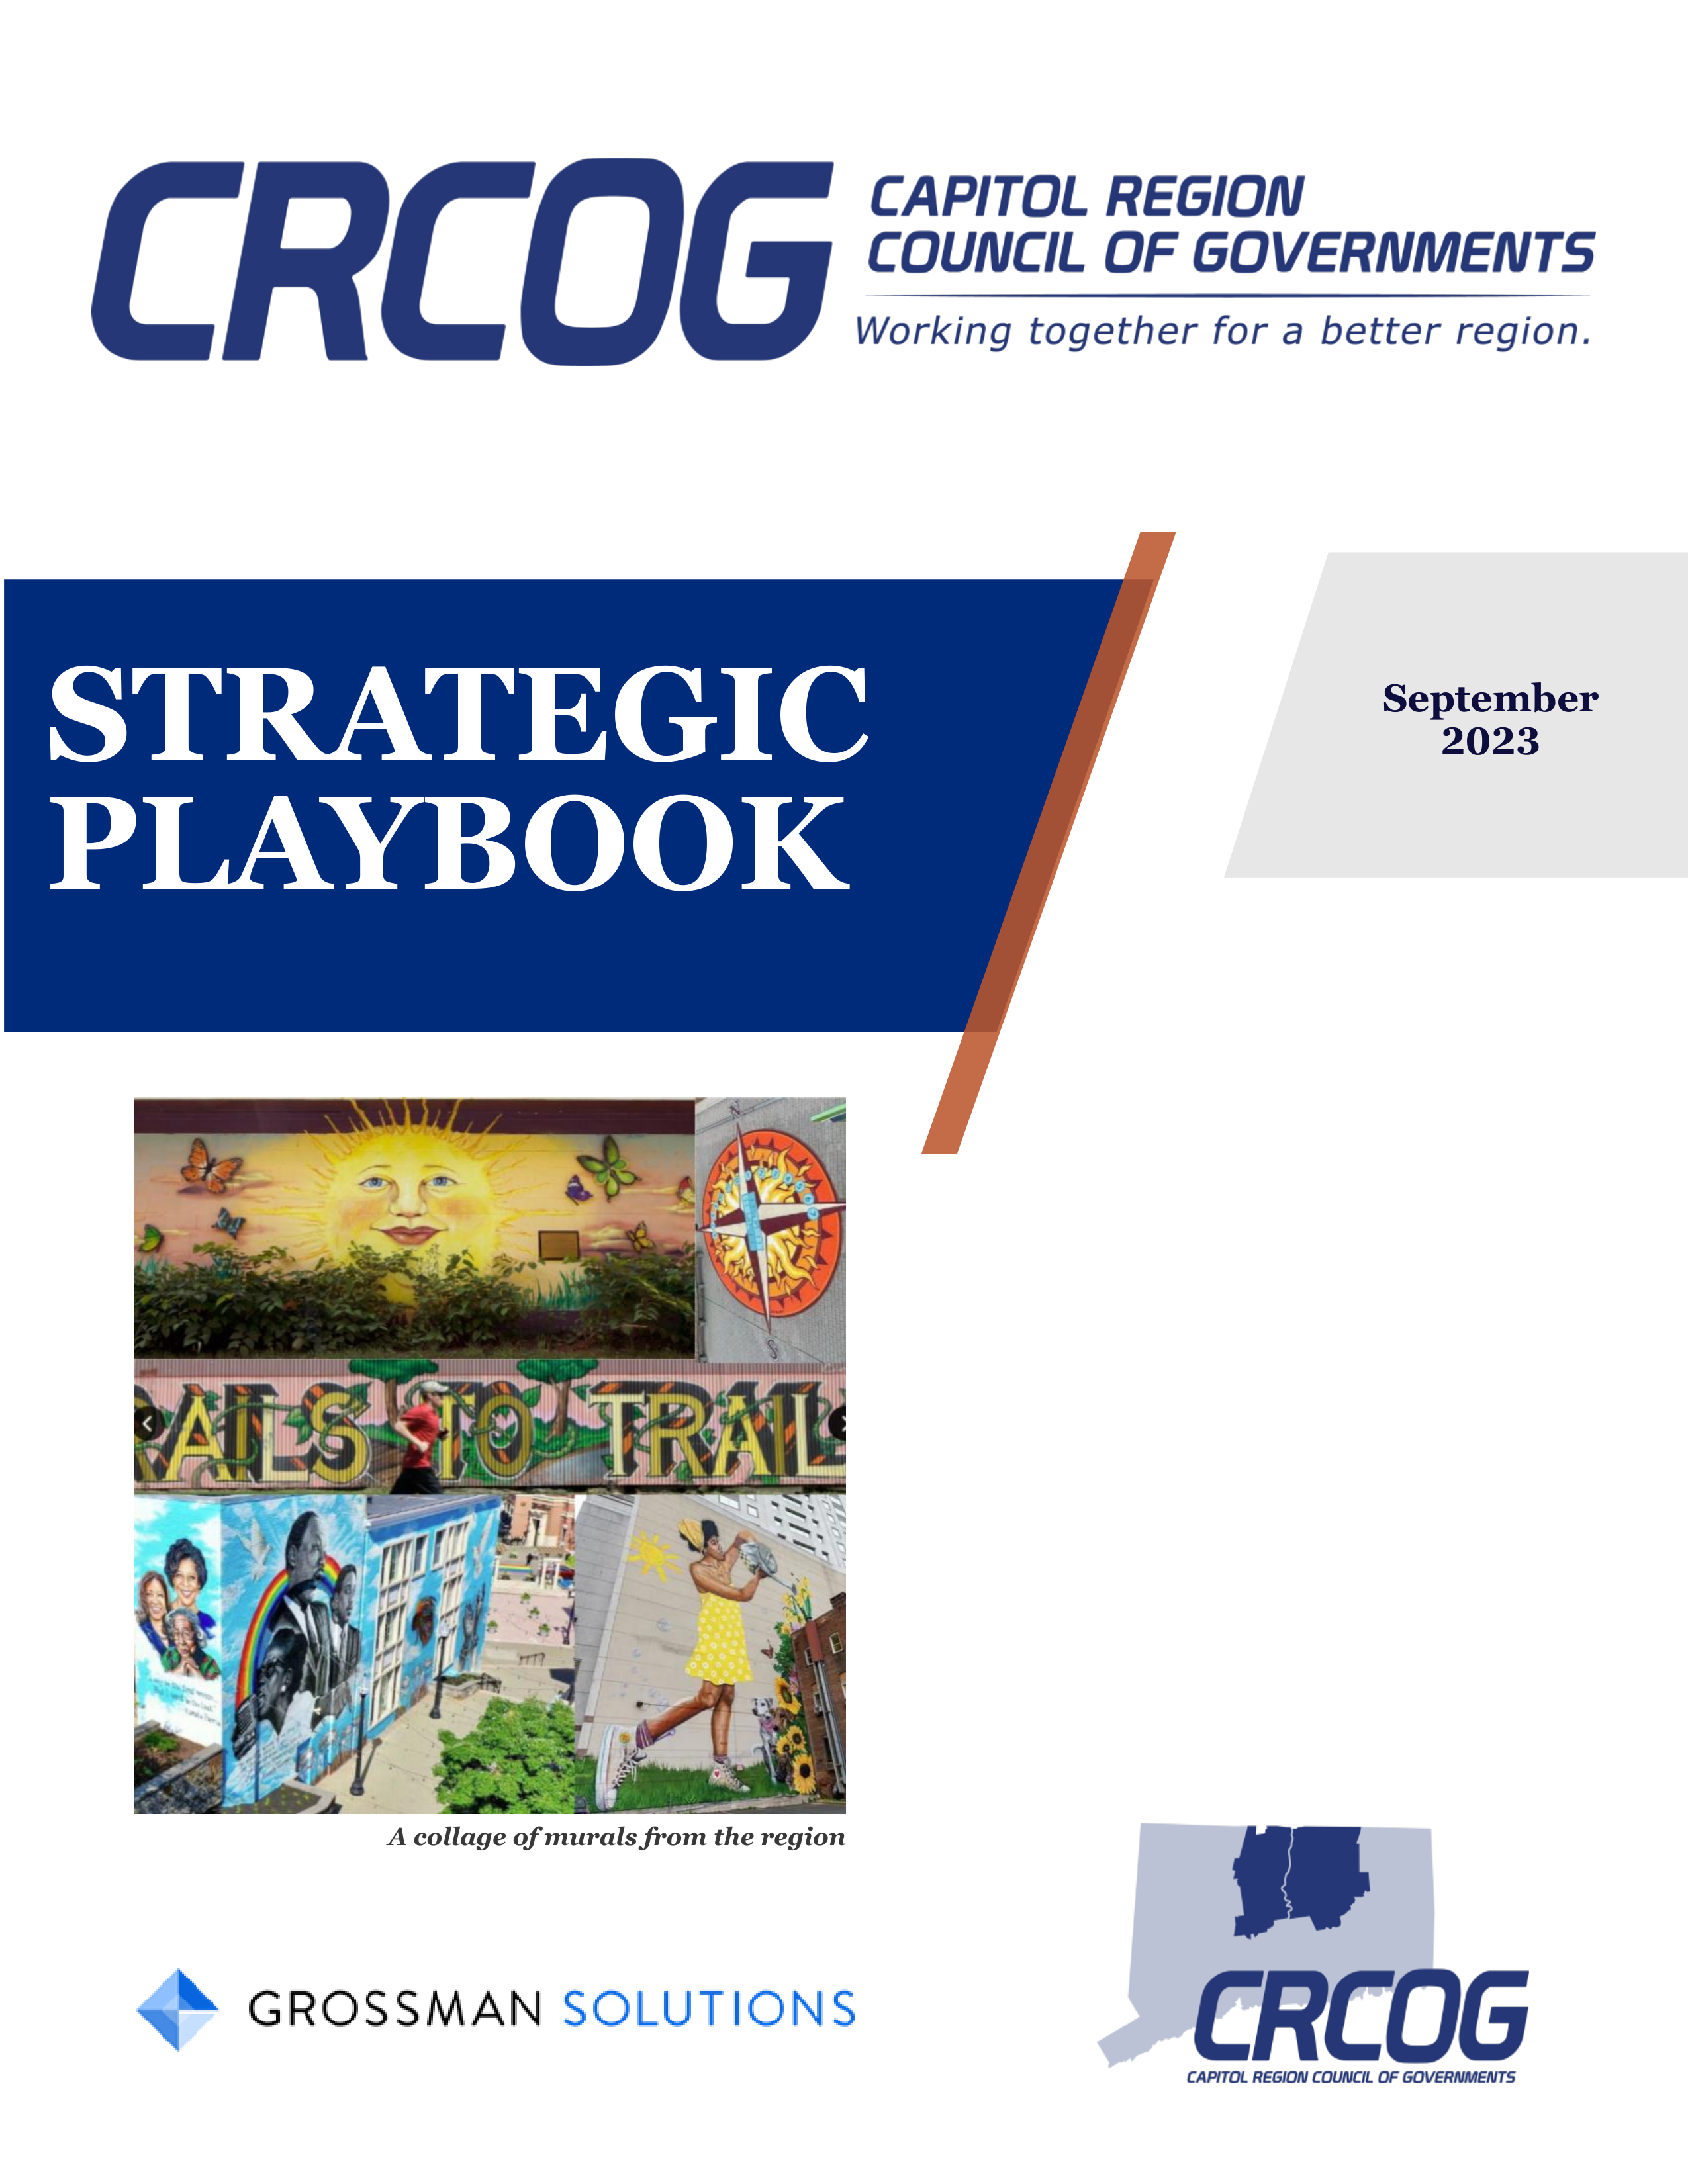 COVER PAGE OF PLAYBOOK